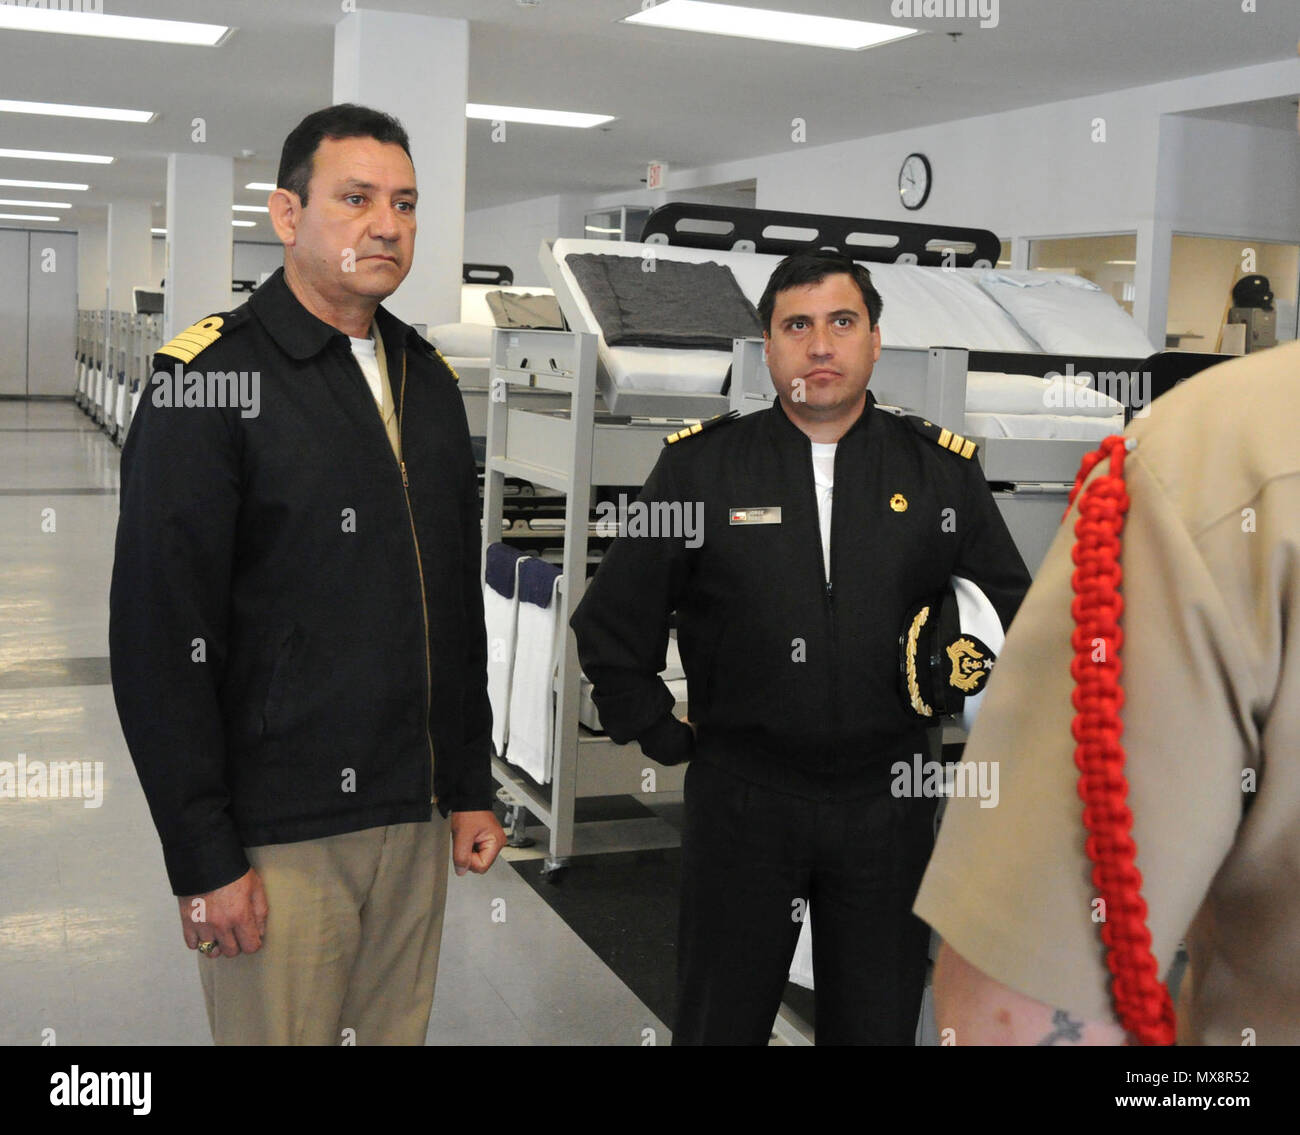 GREAT LAKES, Il. (May 03, 2017) Capt. Xavier Flament, Mexican Navy, and Cmdr. Jorge Toso, Chilean Navy listen to a Recruit Division Commander give a brief on recruit barracks living during a foreign officers tour May 3, at Recruit Training Command. The visit included four senior foreign liaison members from U.S. Fleet Forces Command who toured RTC and Training Support Center over a three-day period. The officers were representing the Mexican, Brazilian, Chilean, and Peruvian navies.  About 30,000-40,000 recruits graduate annually from the Navy's only boot camp. Stock Photo